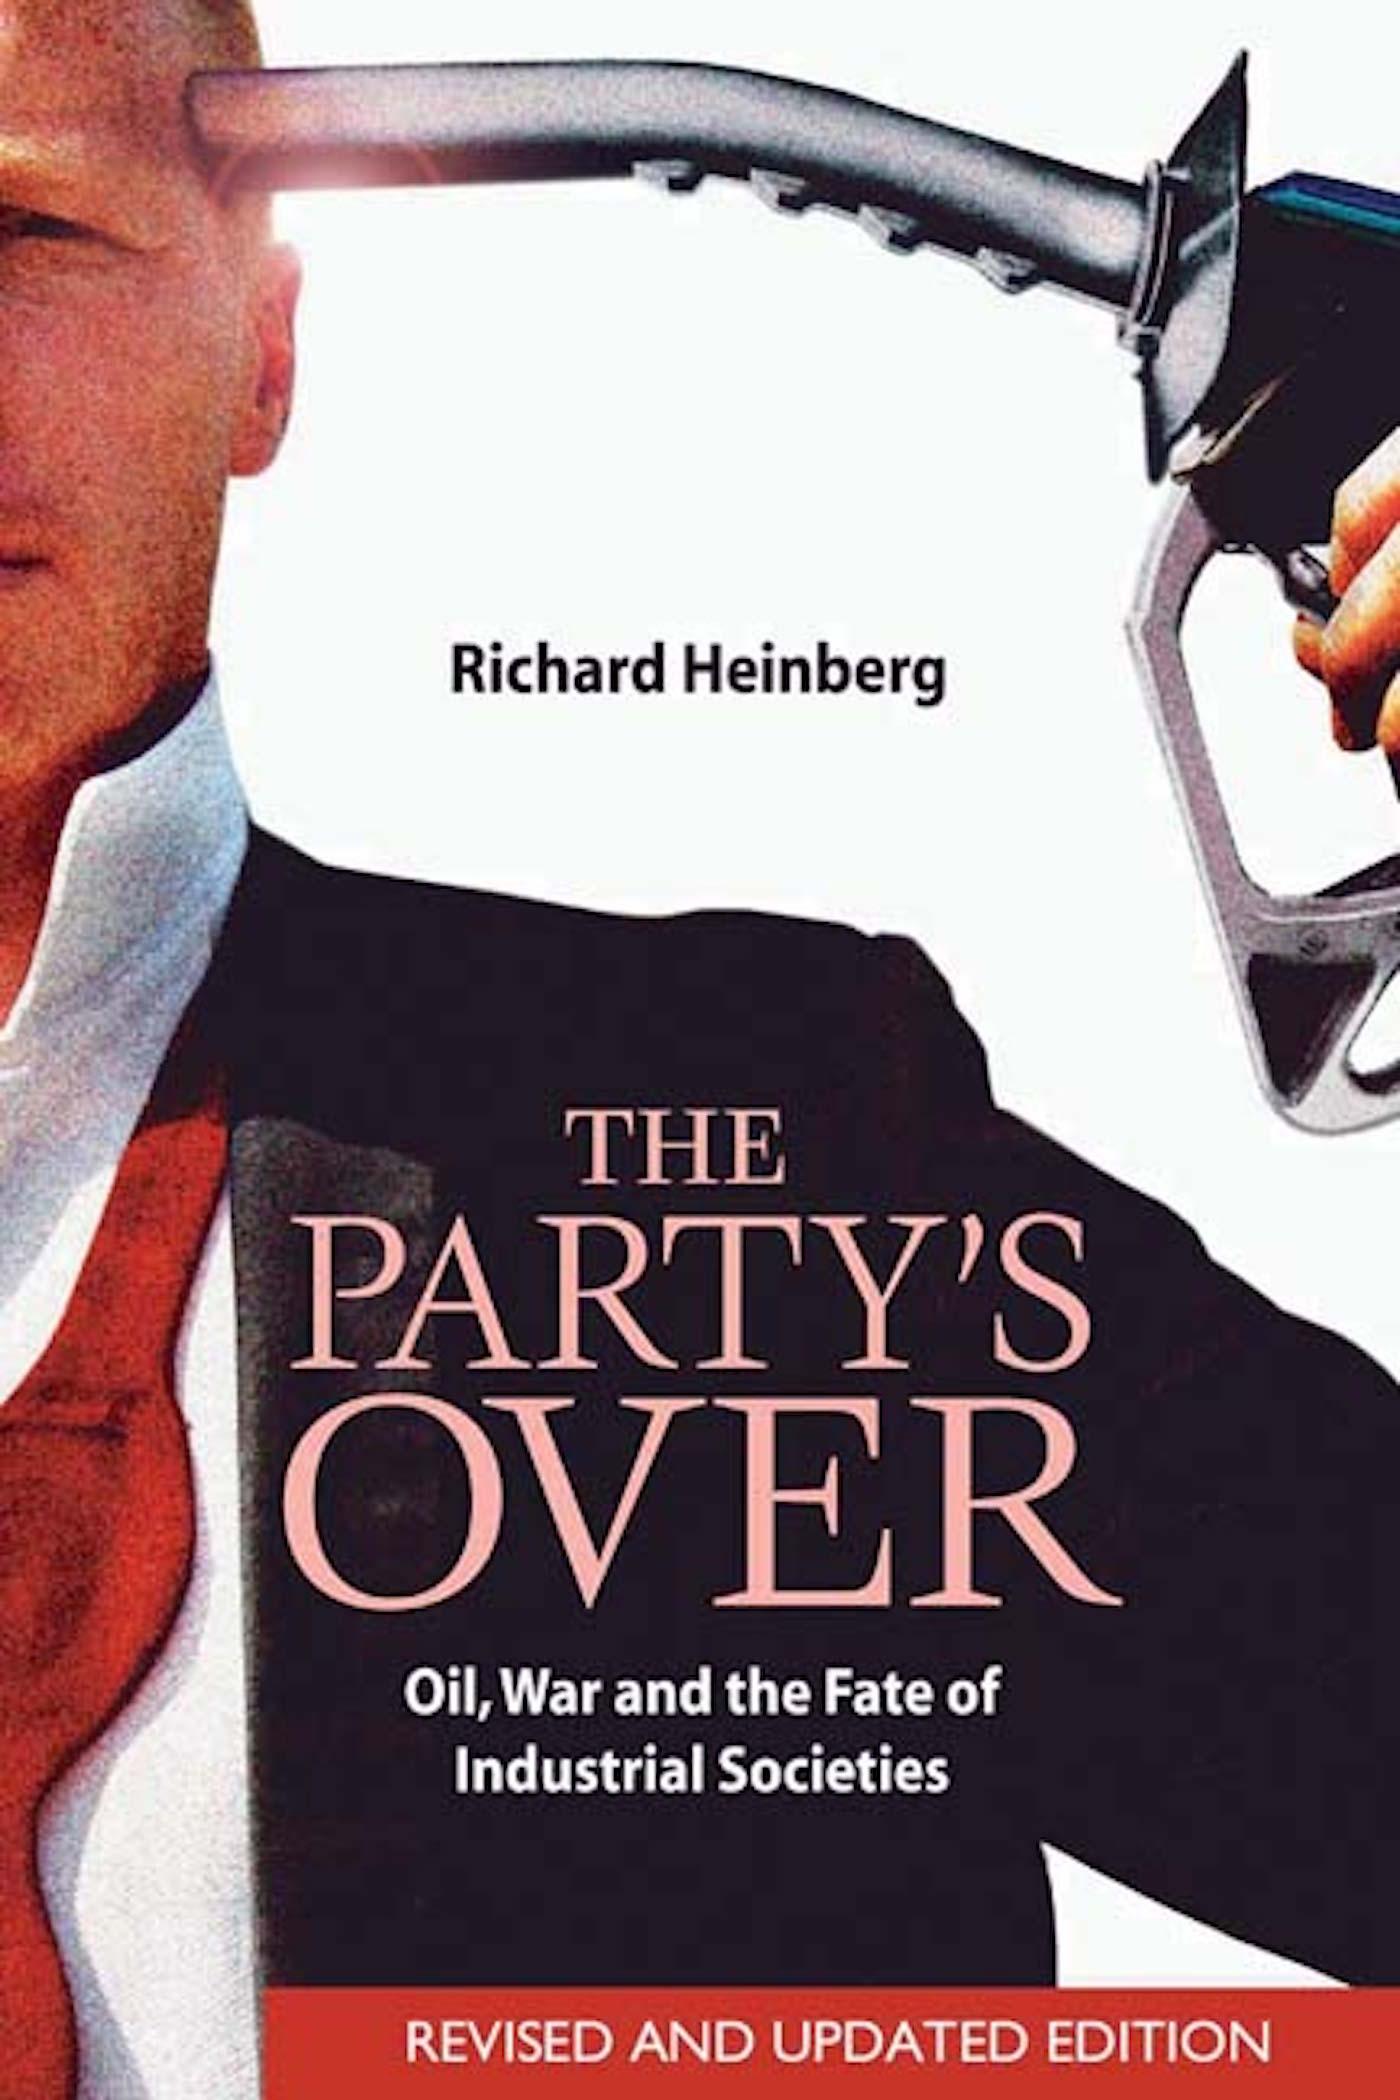 The Party's Over : Oil, War and the Fate of Industrial Societies (Edition 2) (Paperback) - image 1 of 1